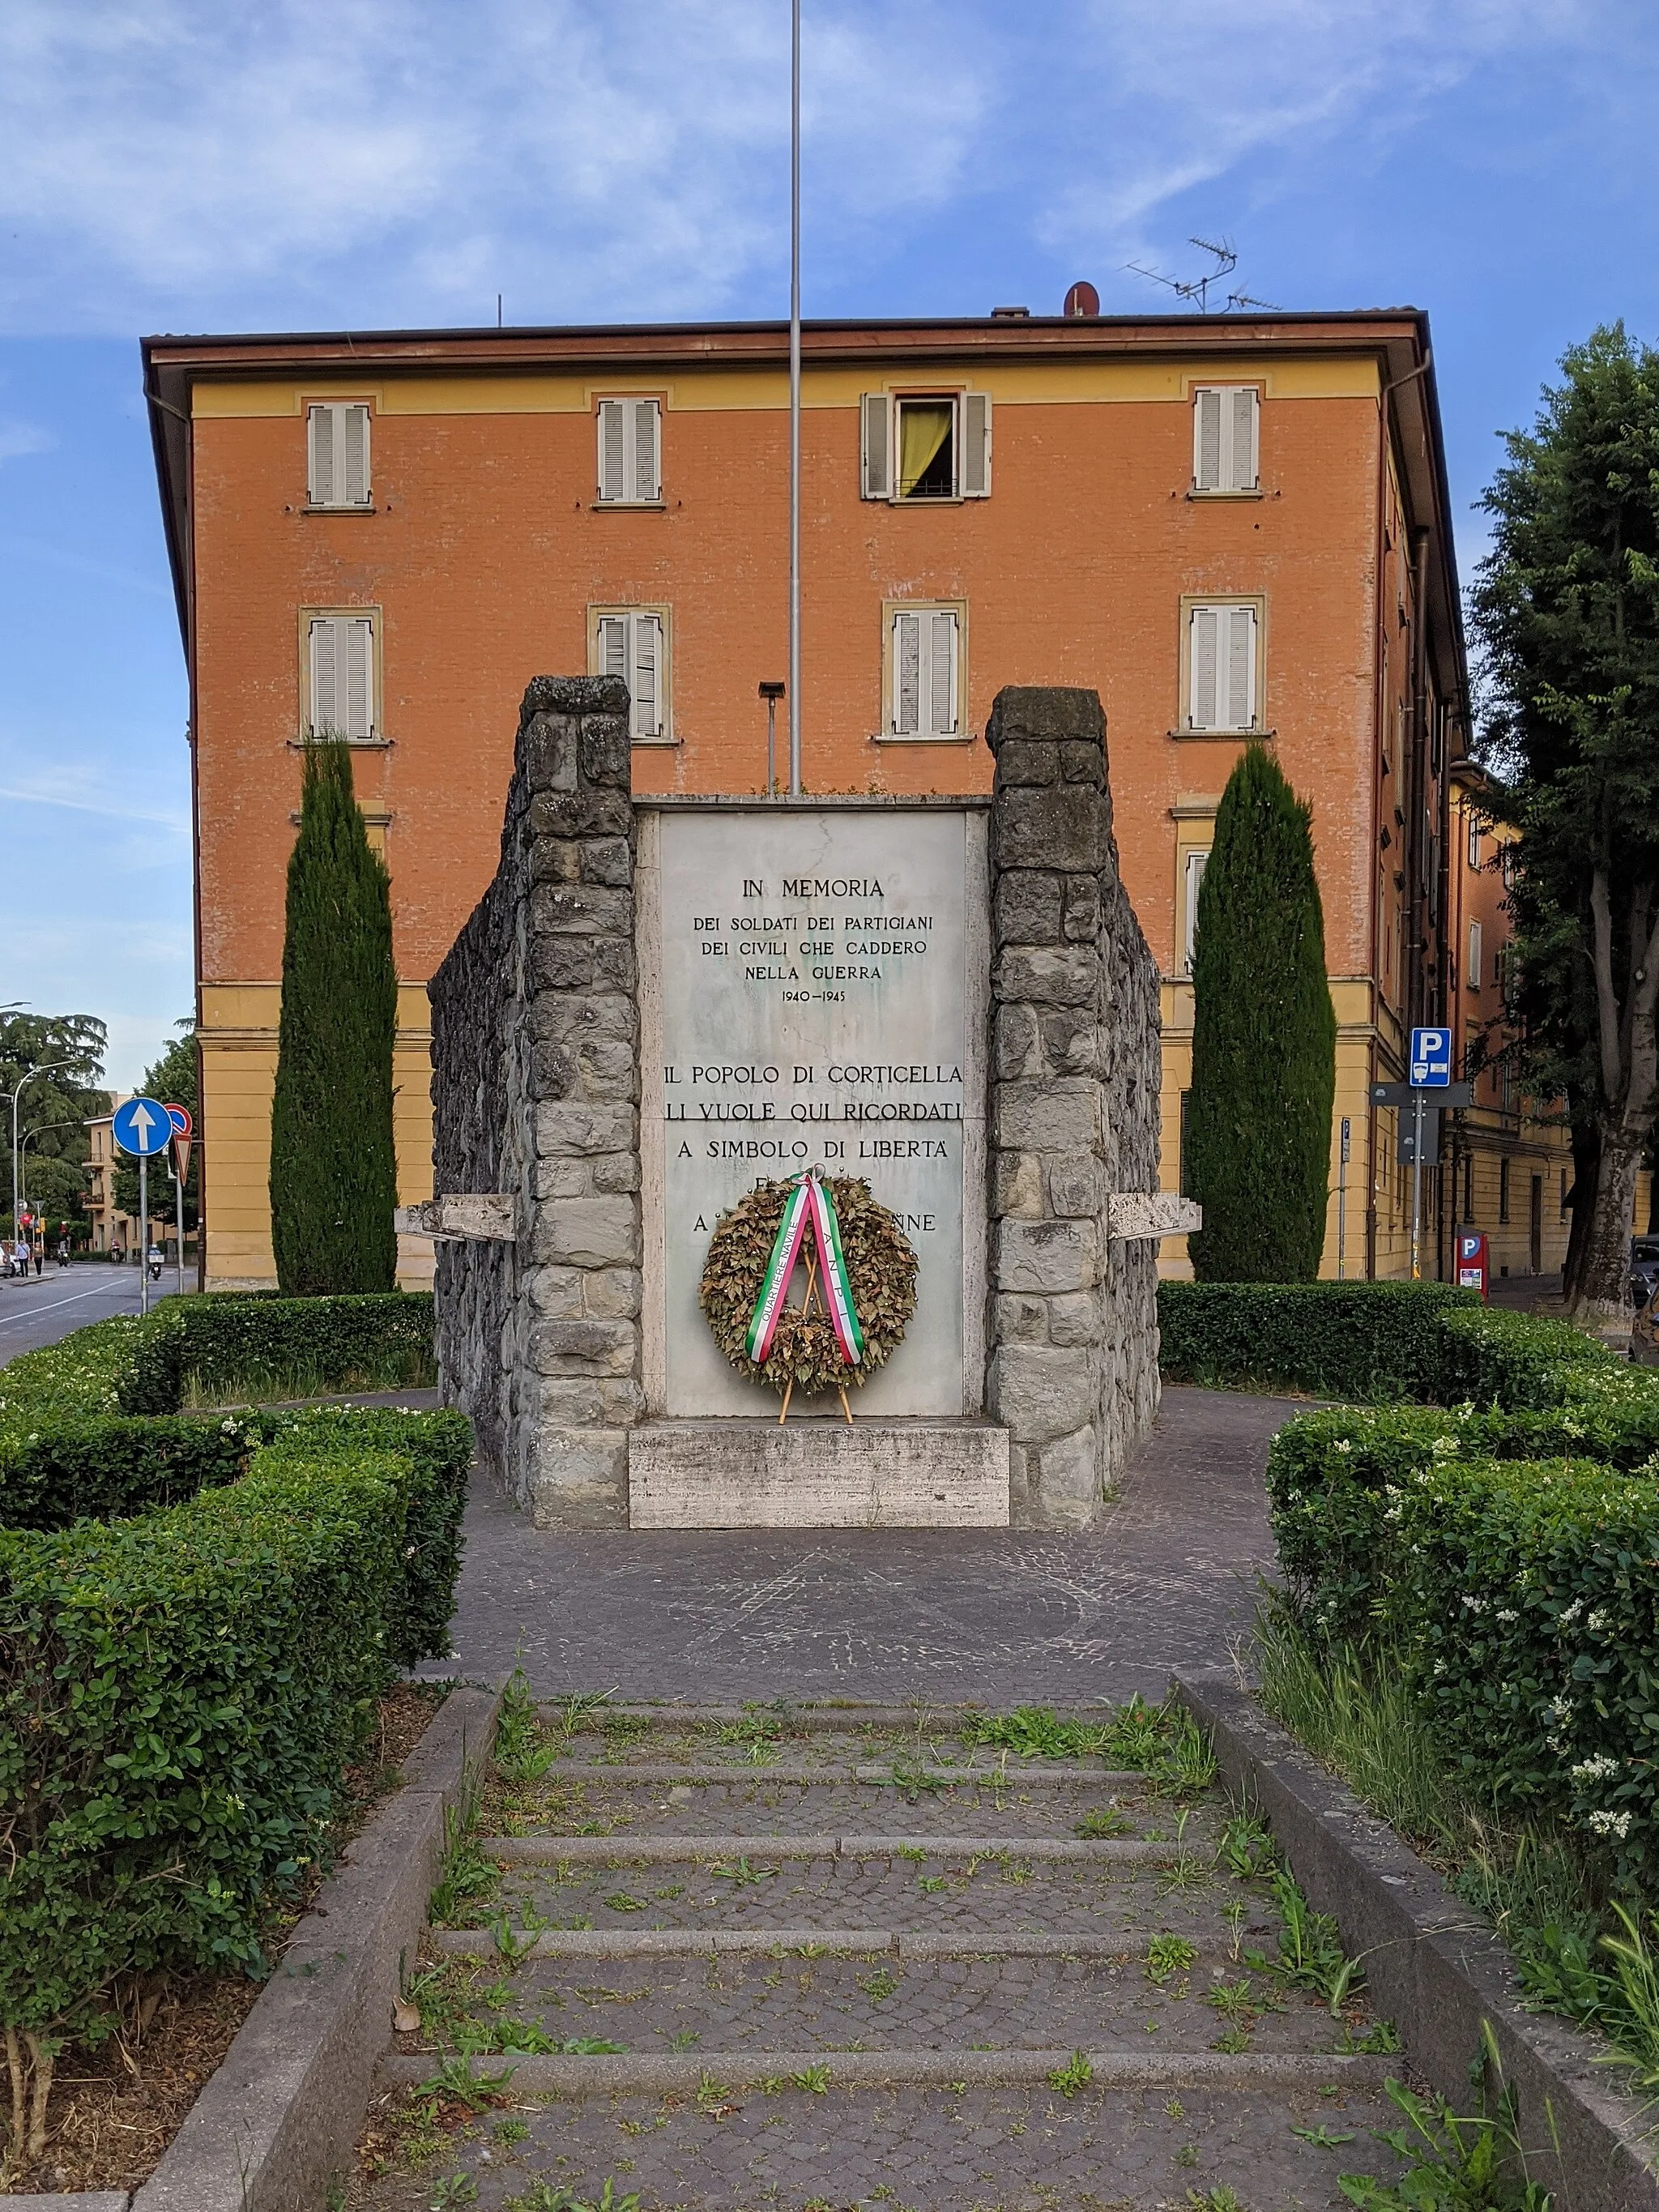 Photo showing: War memorial dedicated to victims of World War I and II in Corticella, Bologna, Italy.